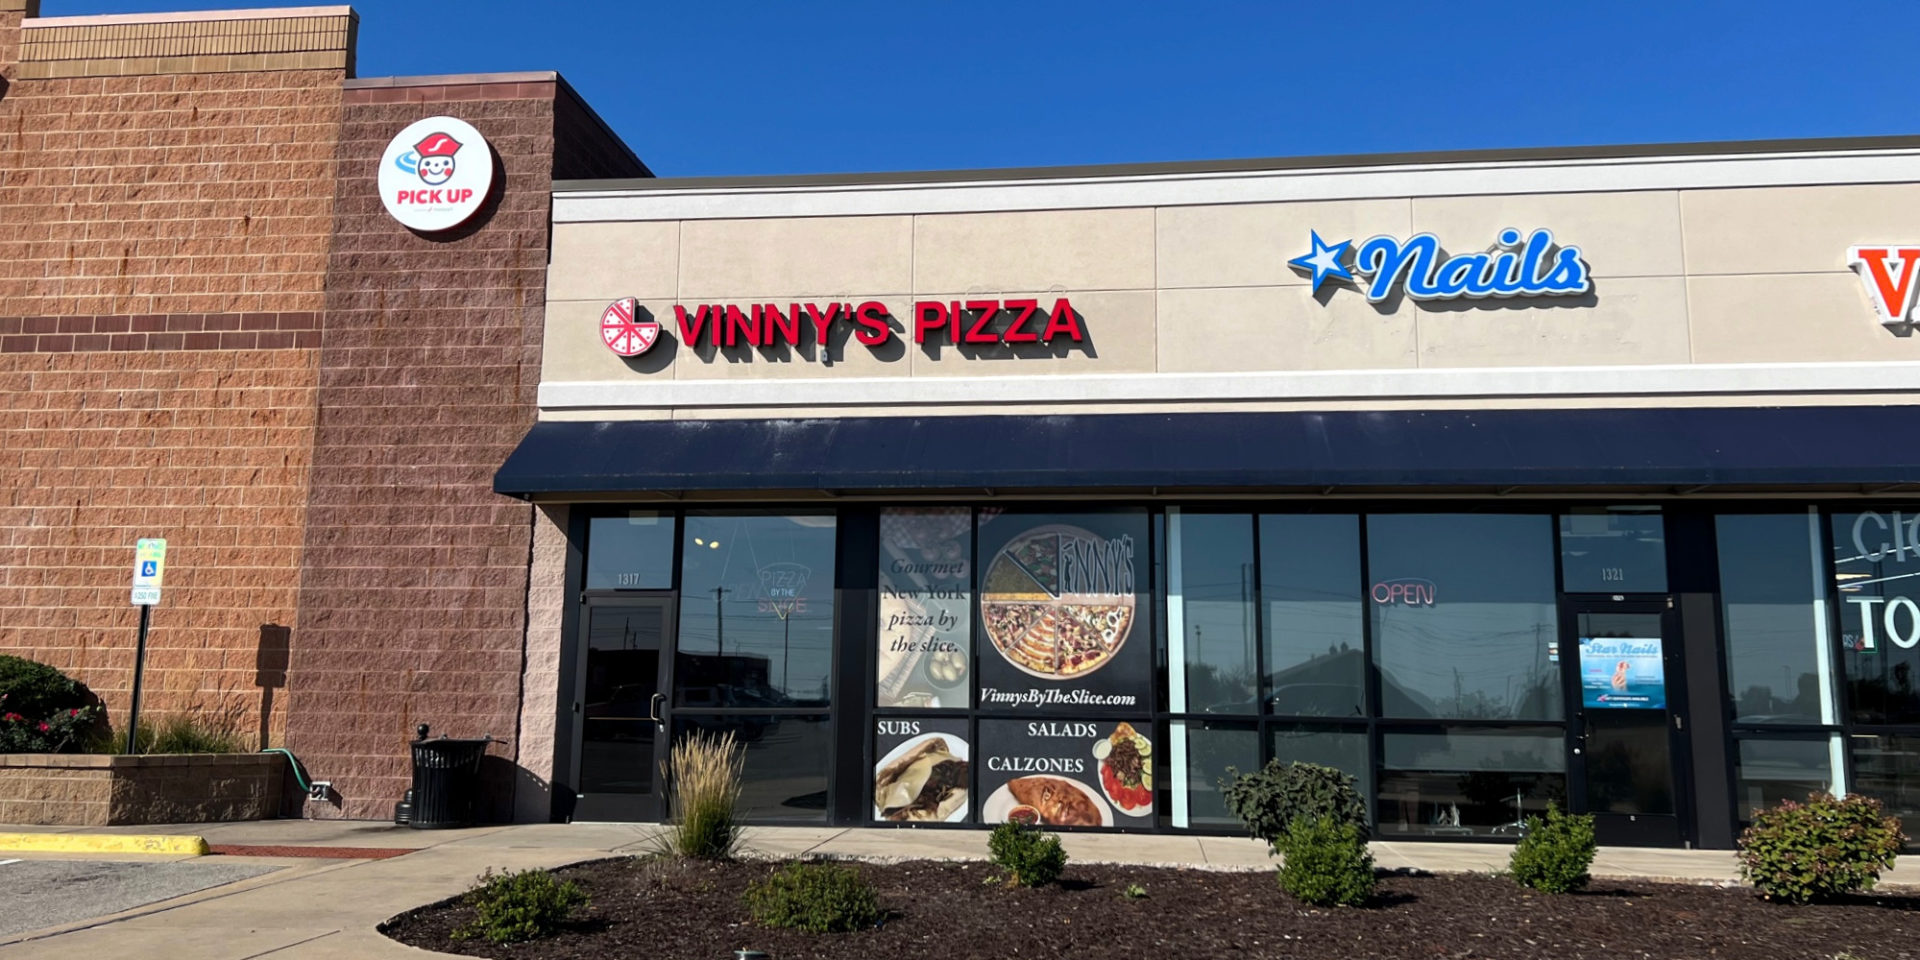 Vinny’s Pizza is opening a new location in Savoy this October